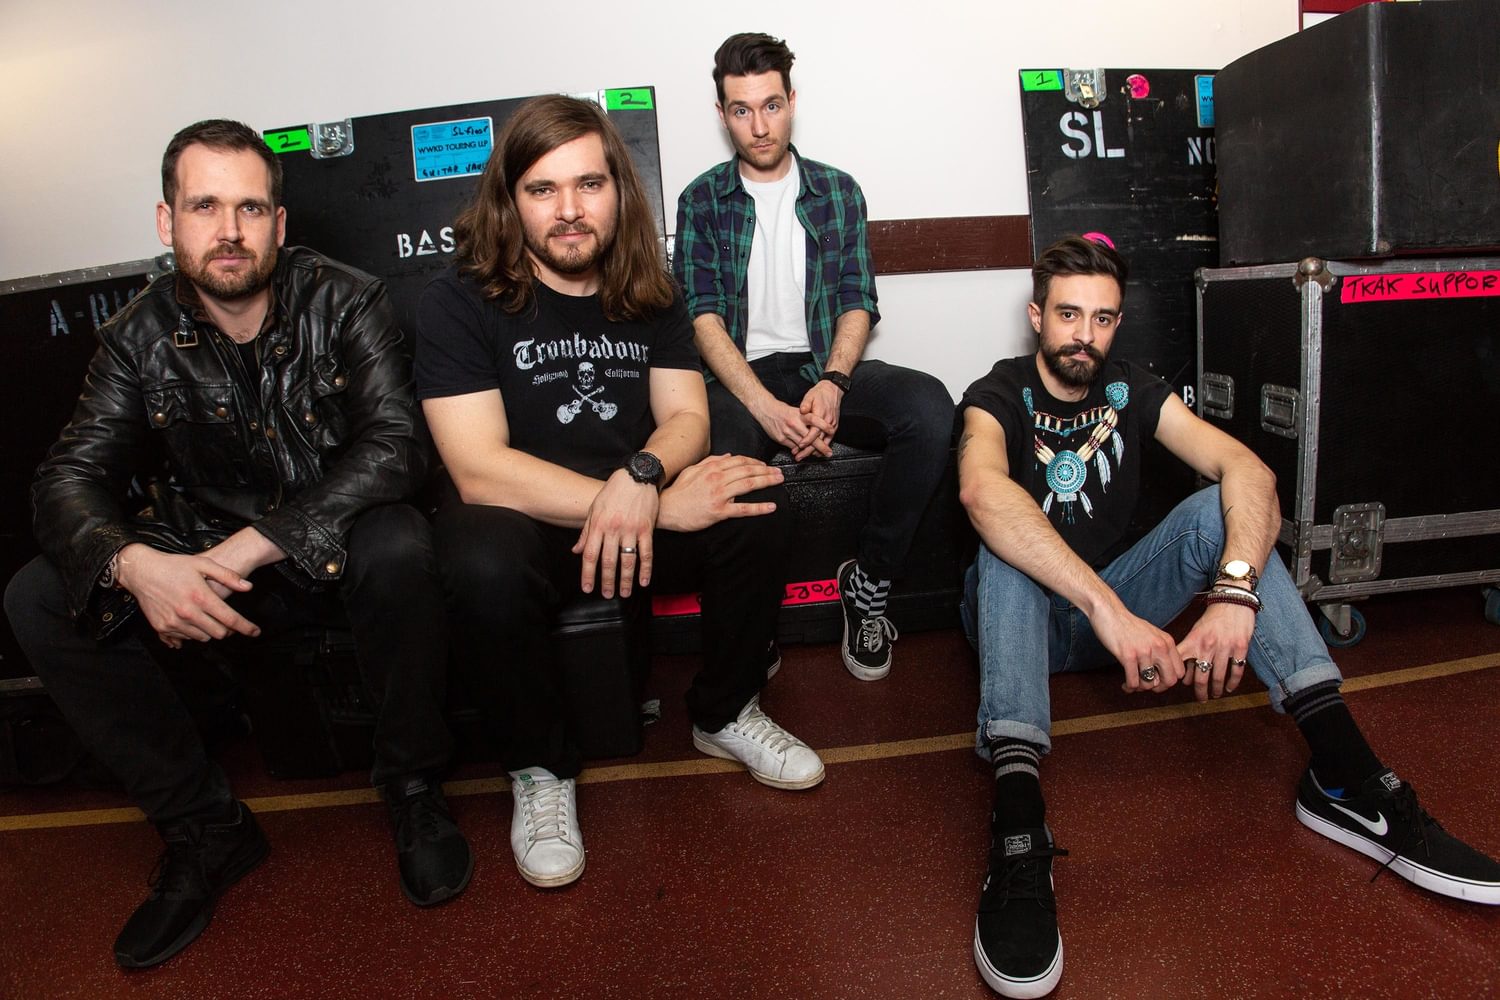 Lost in Orchestration: Bastille